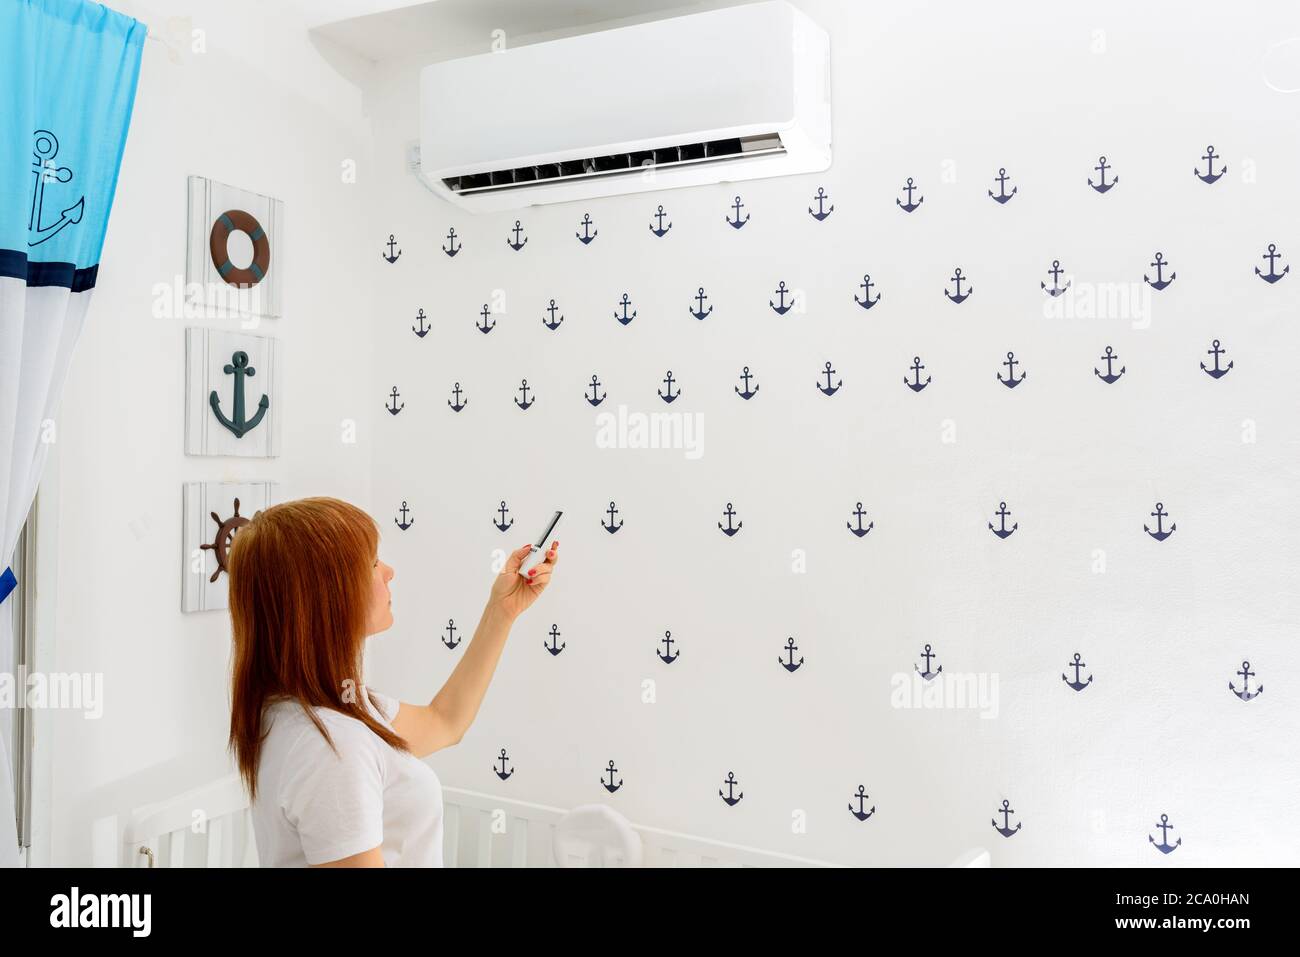 Portrait Of A Happy Woman Holding Remote Control In Front Of Air Conditioner At Home in childrens room.Air conditioner inside the cute baby boys room.With hot weather,is a good solution for family. Stock Photo